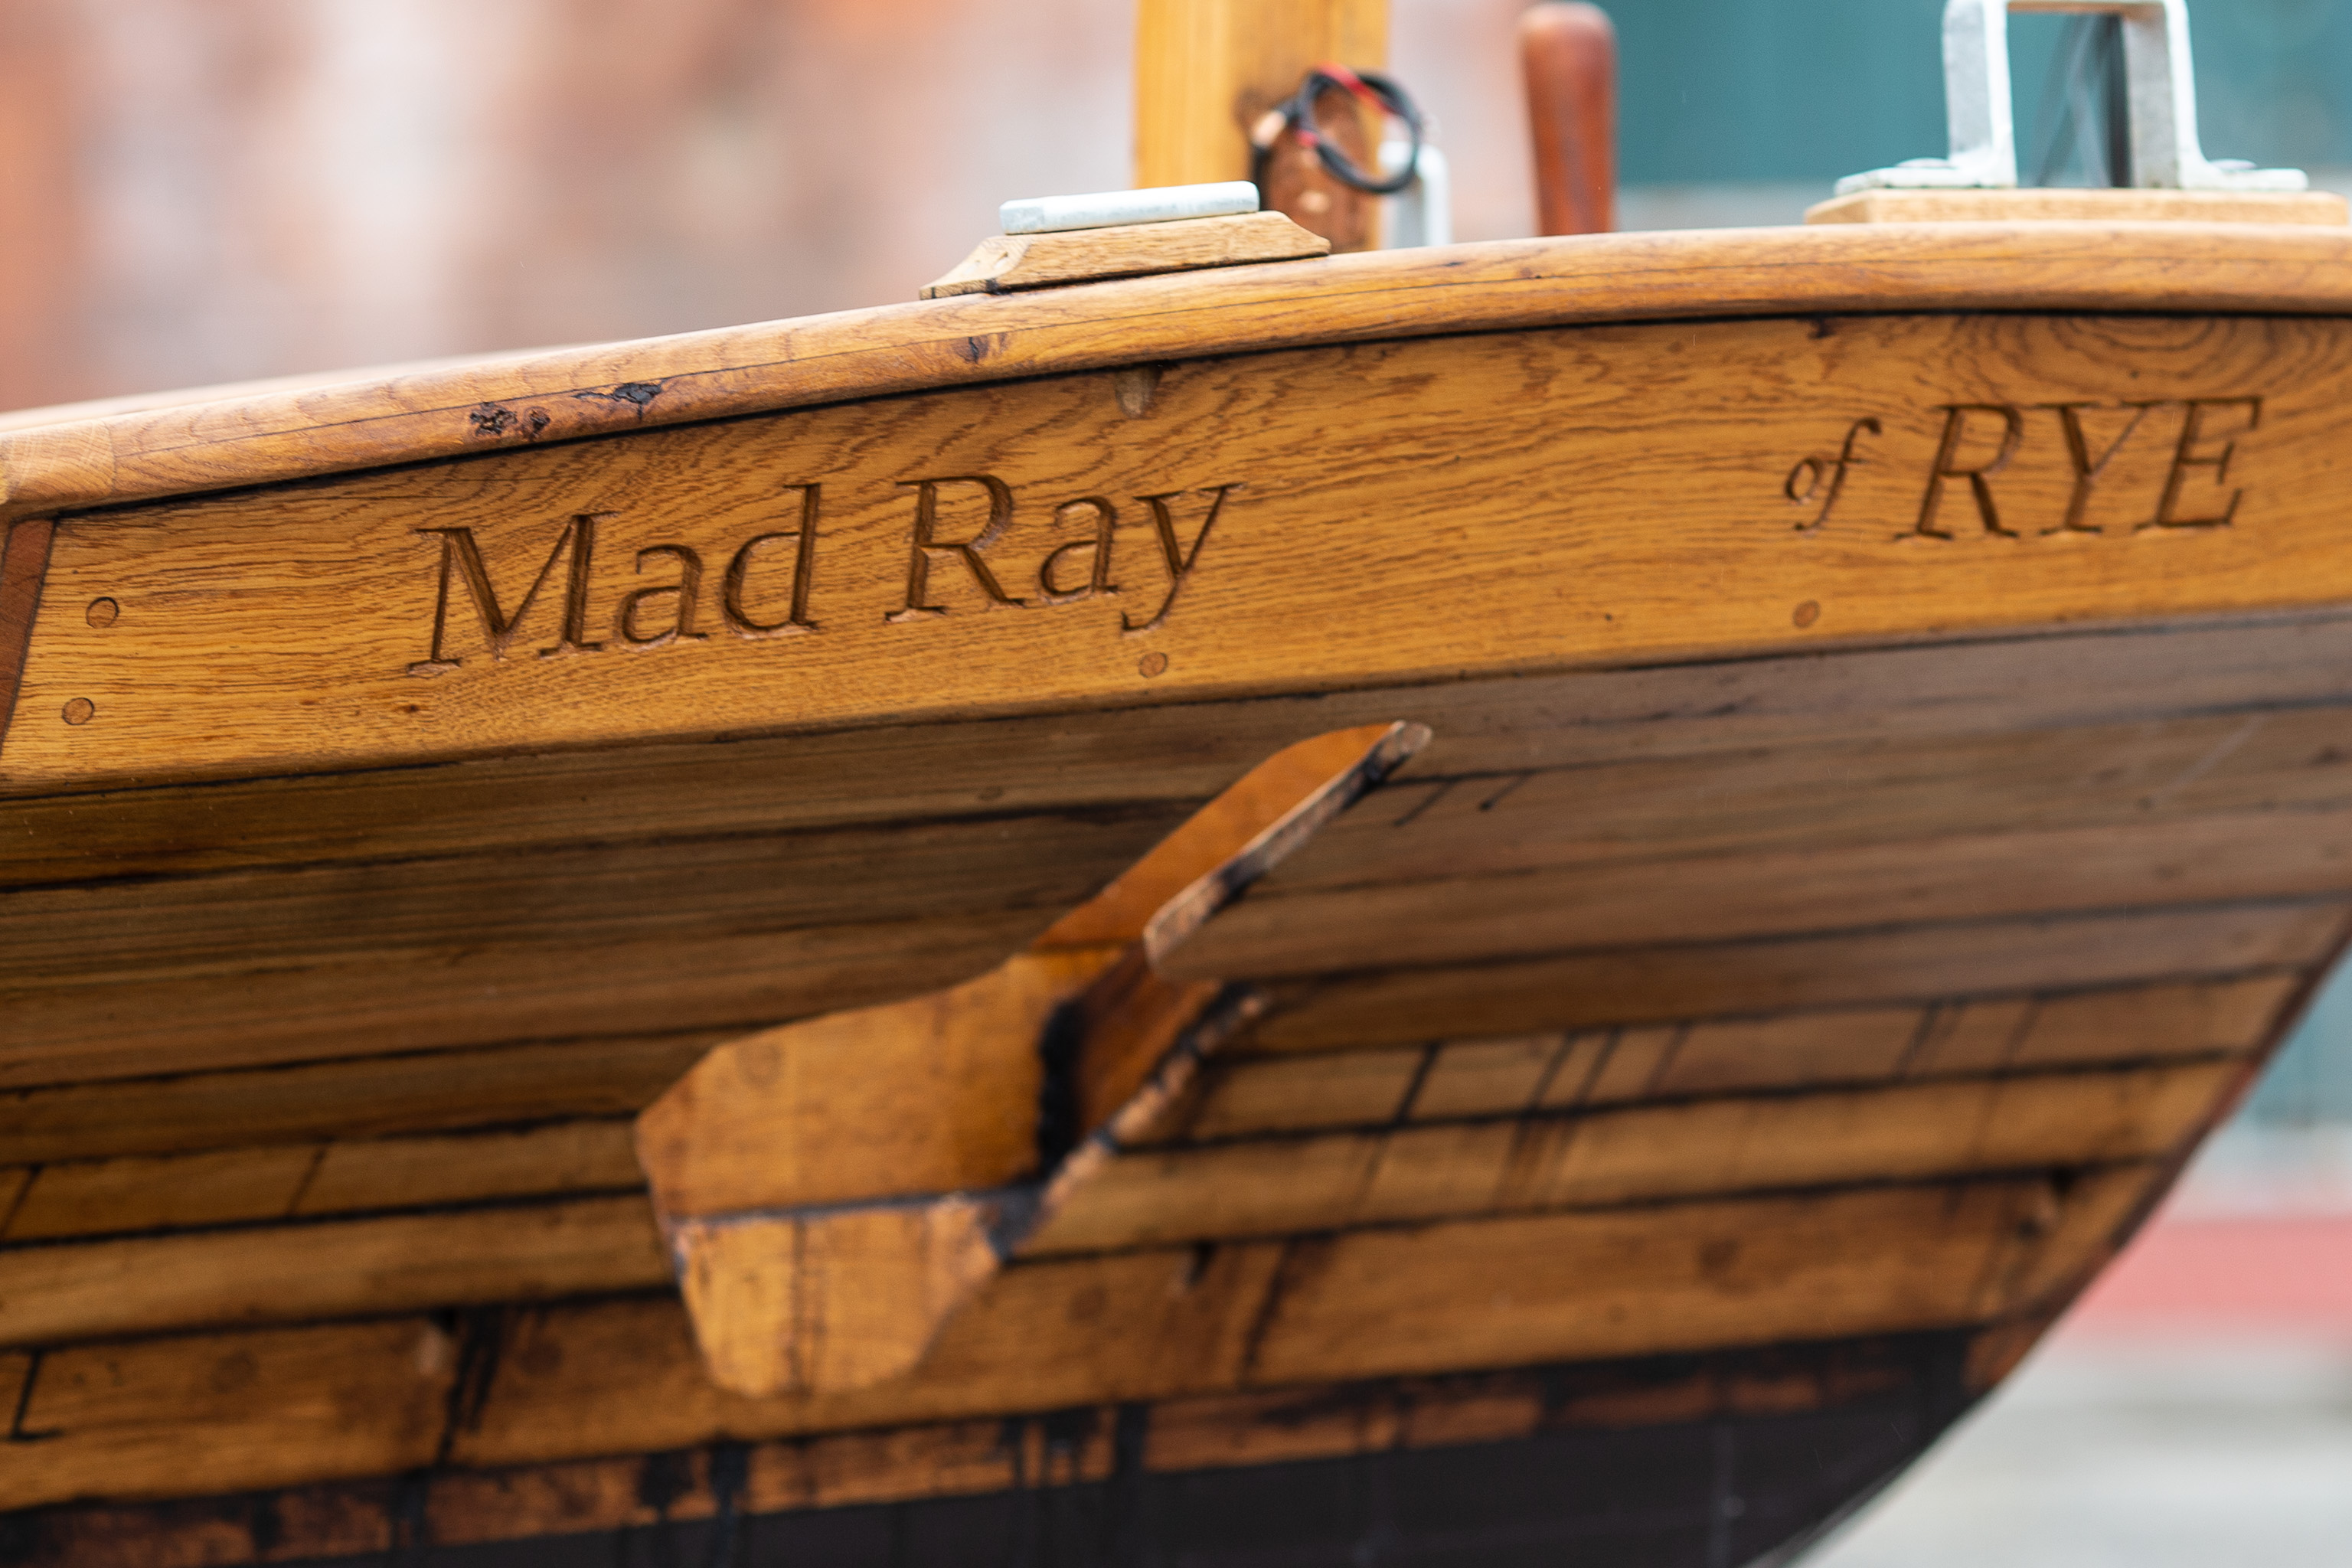 Mad Ray
This boat's been under construction at Underfall Yard for quite some time. Here she is back in April. This is the first time I've seen it out of th...